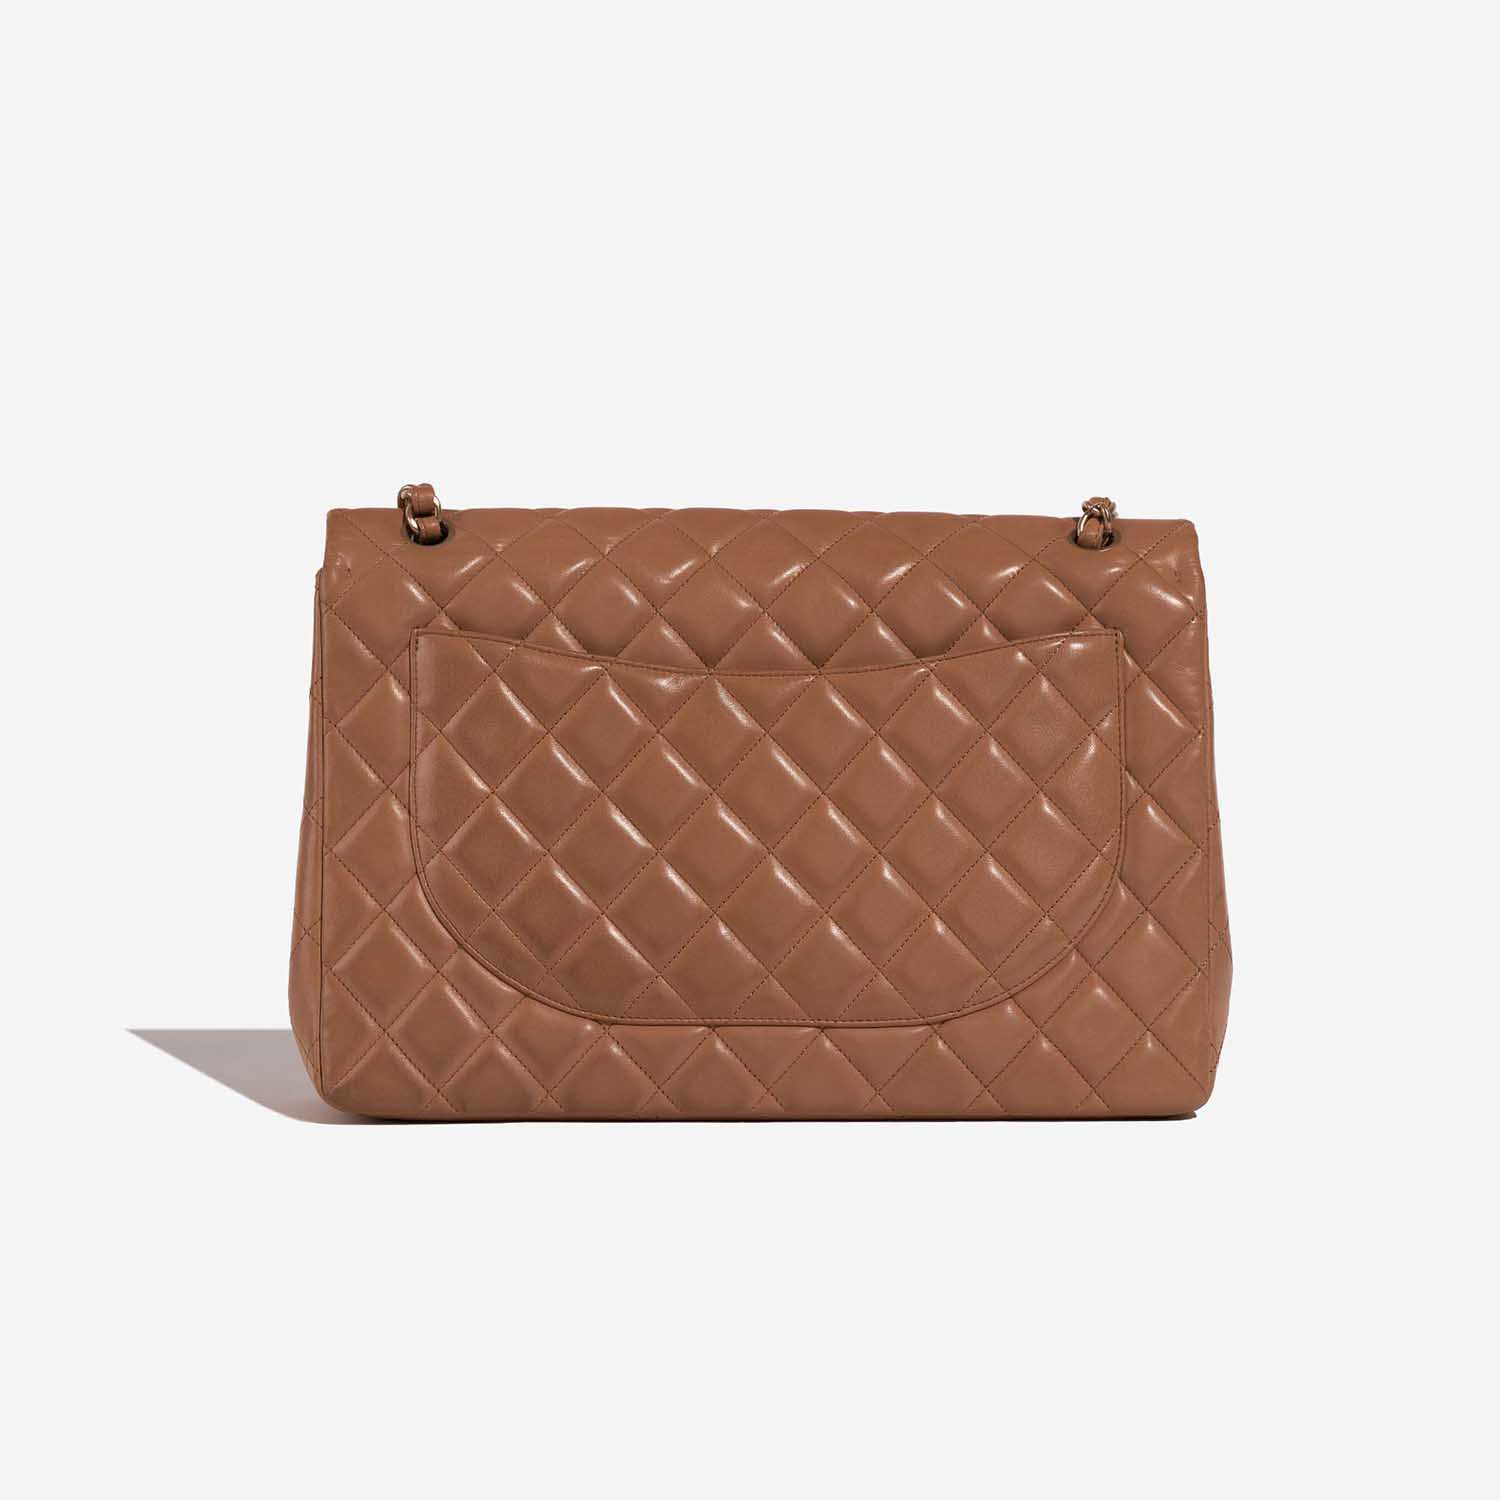 Chanel Timeless Maxi Cognac Back  | Sell your designer bag on Saclab.com